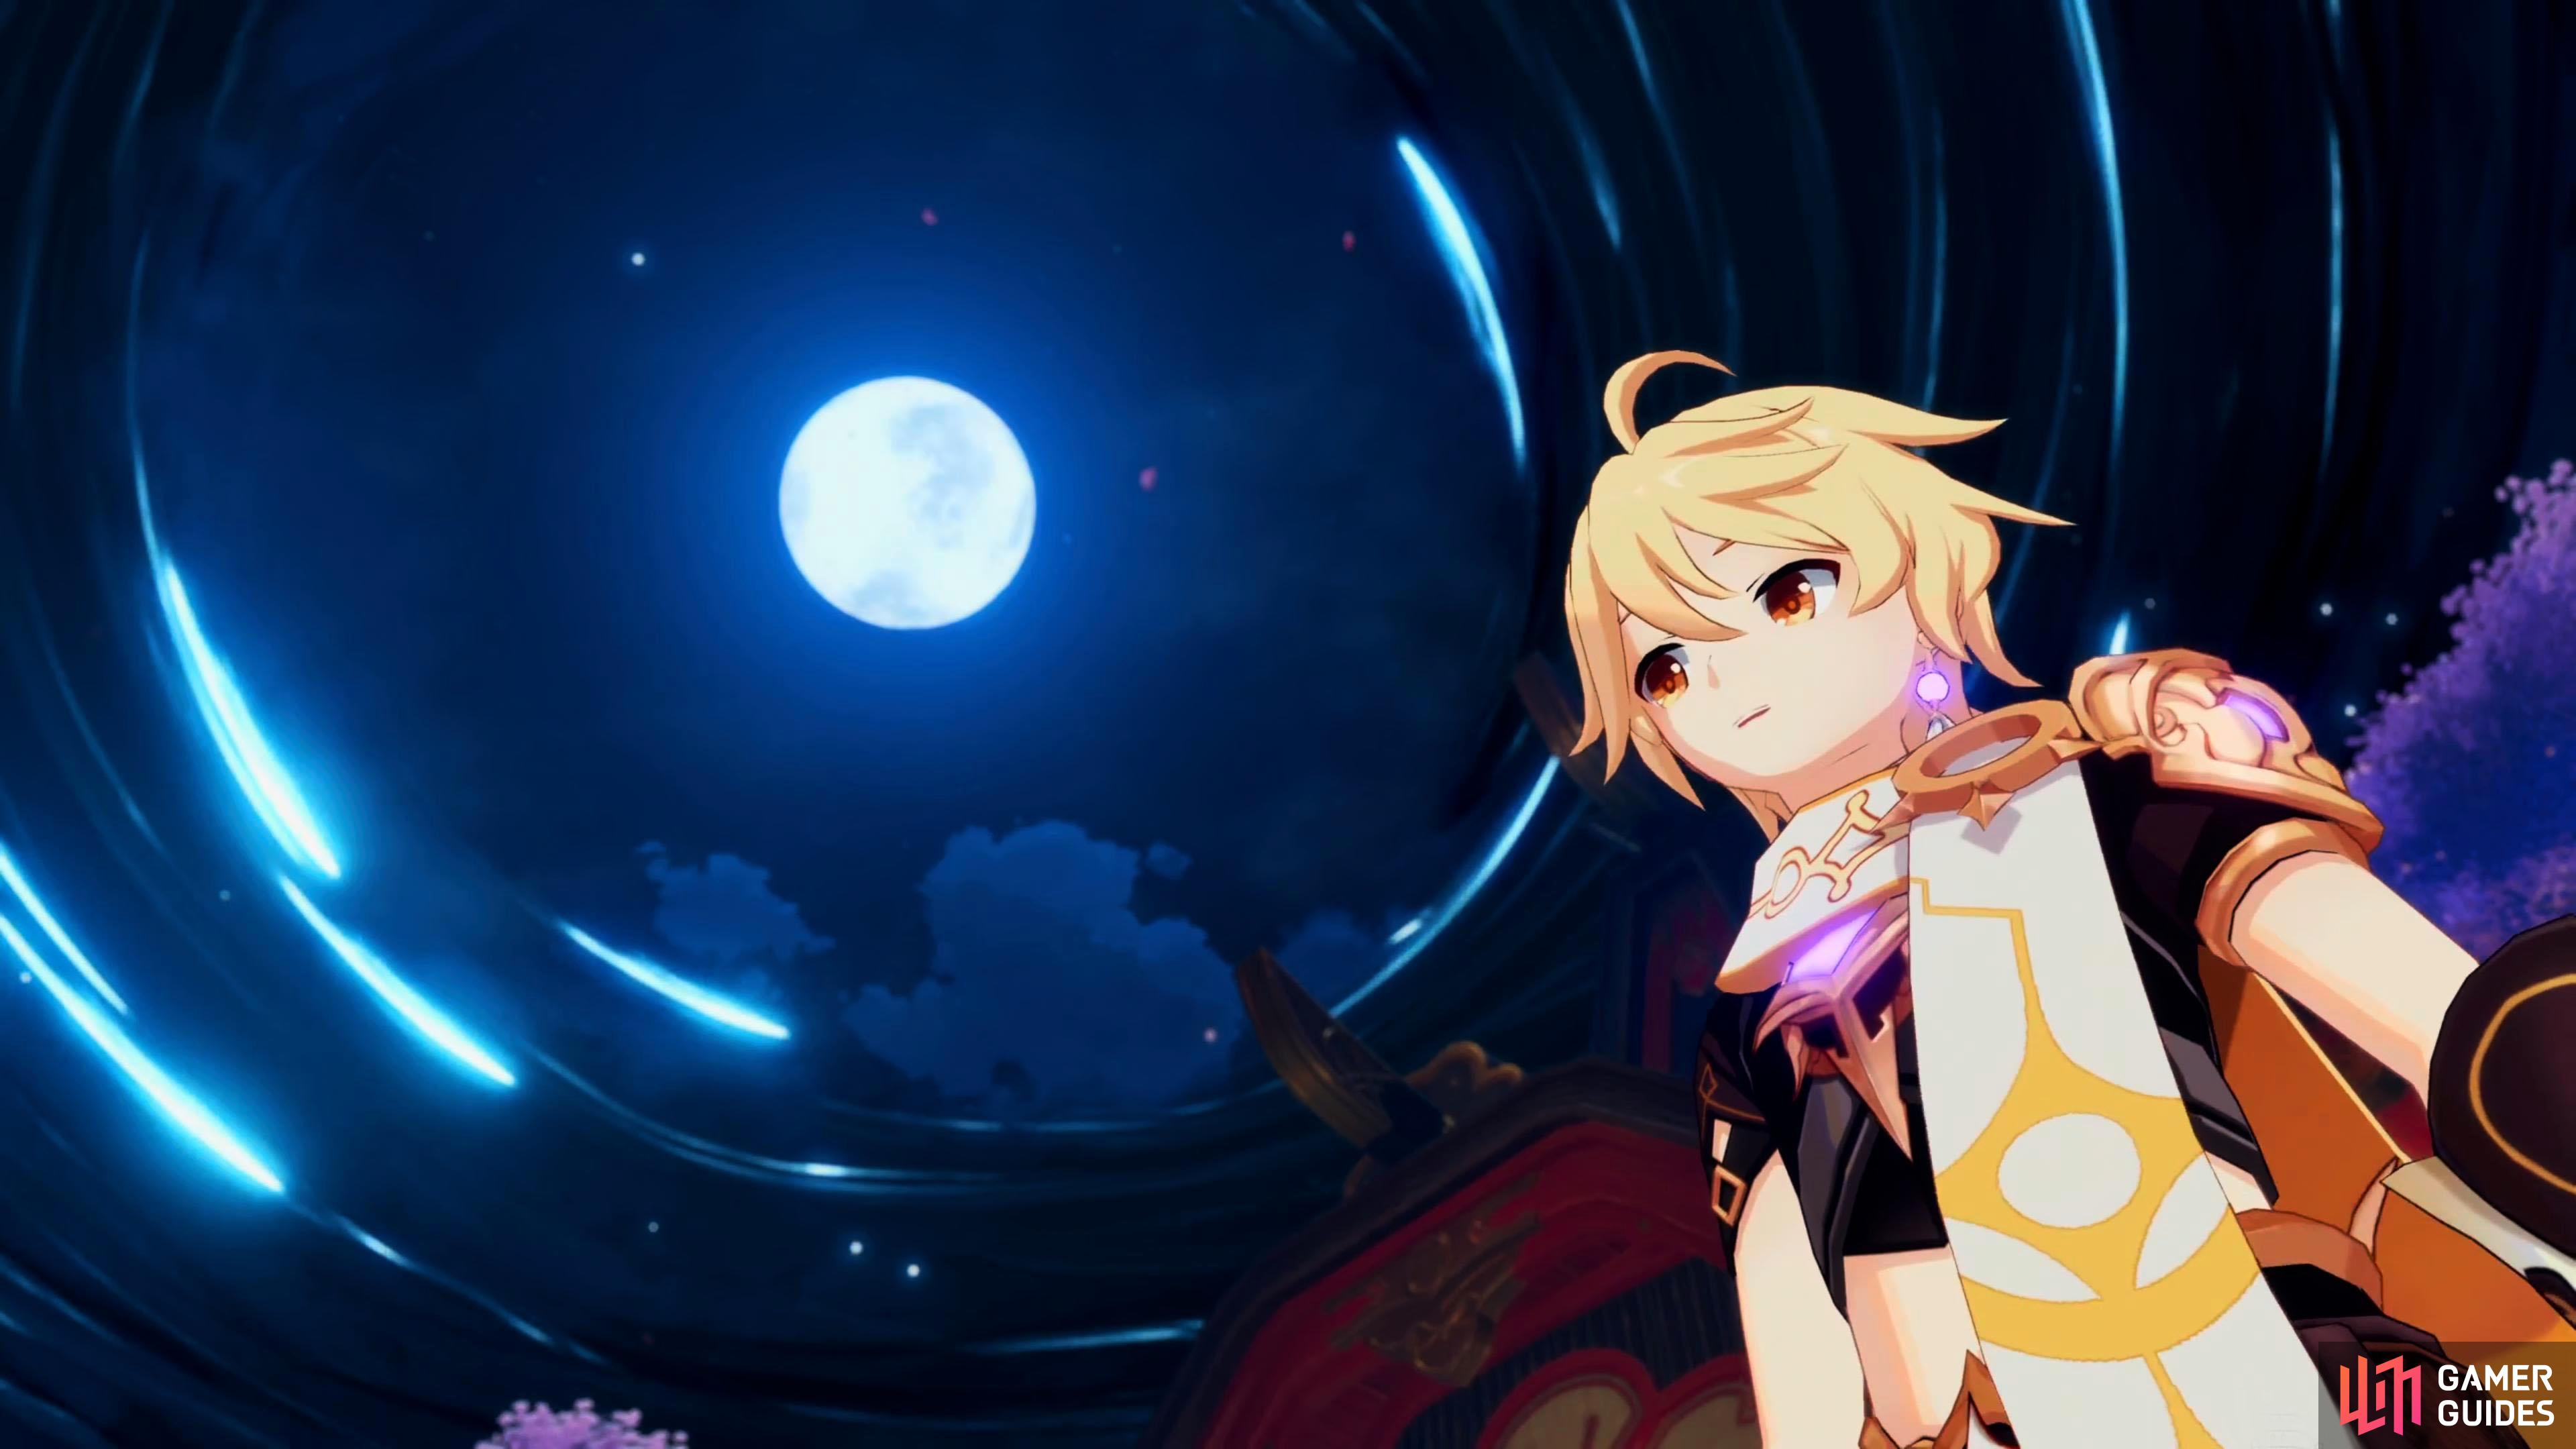 The youkai’s memories are gathering in front of the moon to create a “Moonless Night”.